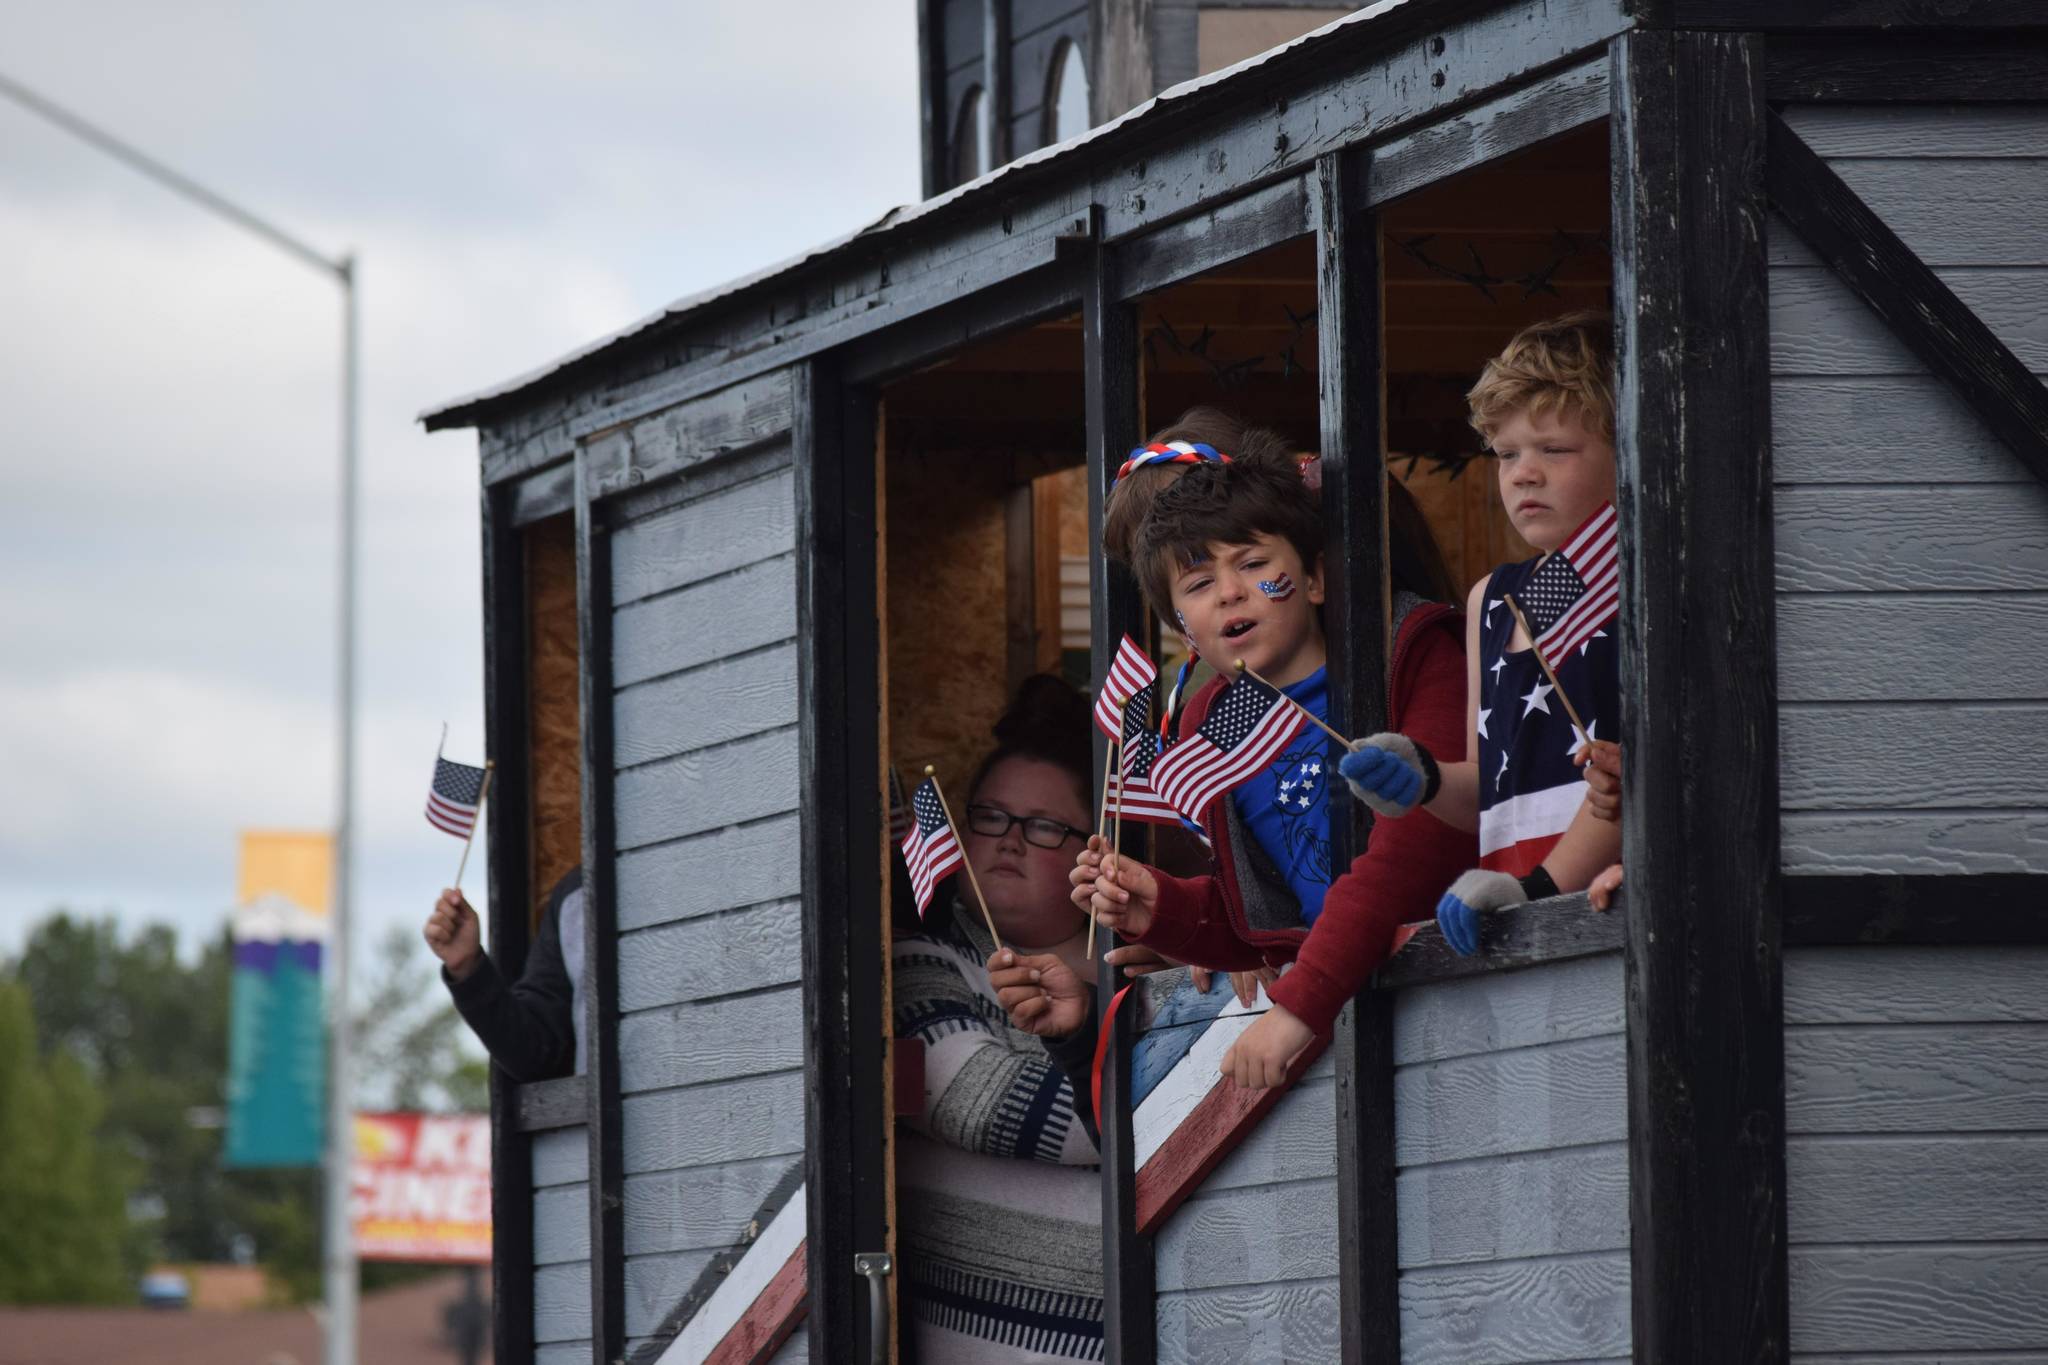 Kids ride in the back of the American Legion float during Kenai’s annual Fourth of July parade on July 4, 2021. (Camille Botello / Peninsula Clarion)